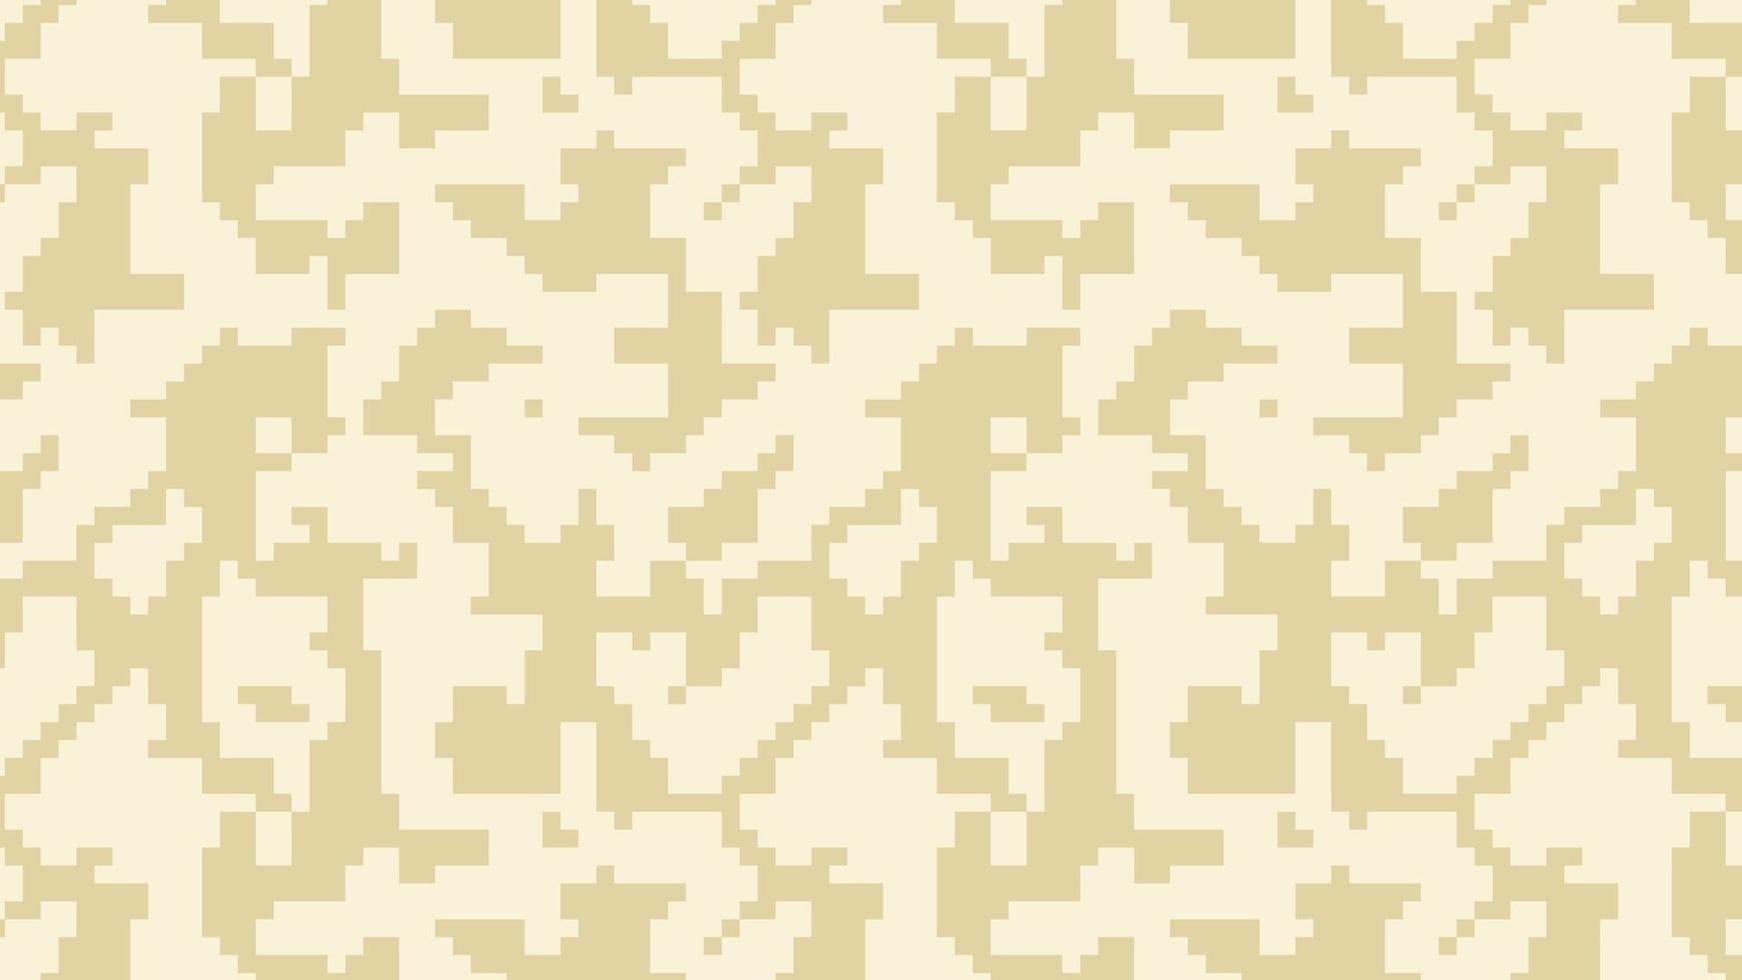 Military and army pixel camouflage pattern background vector